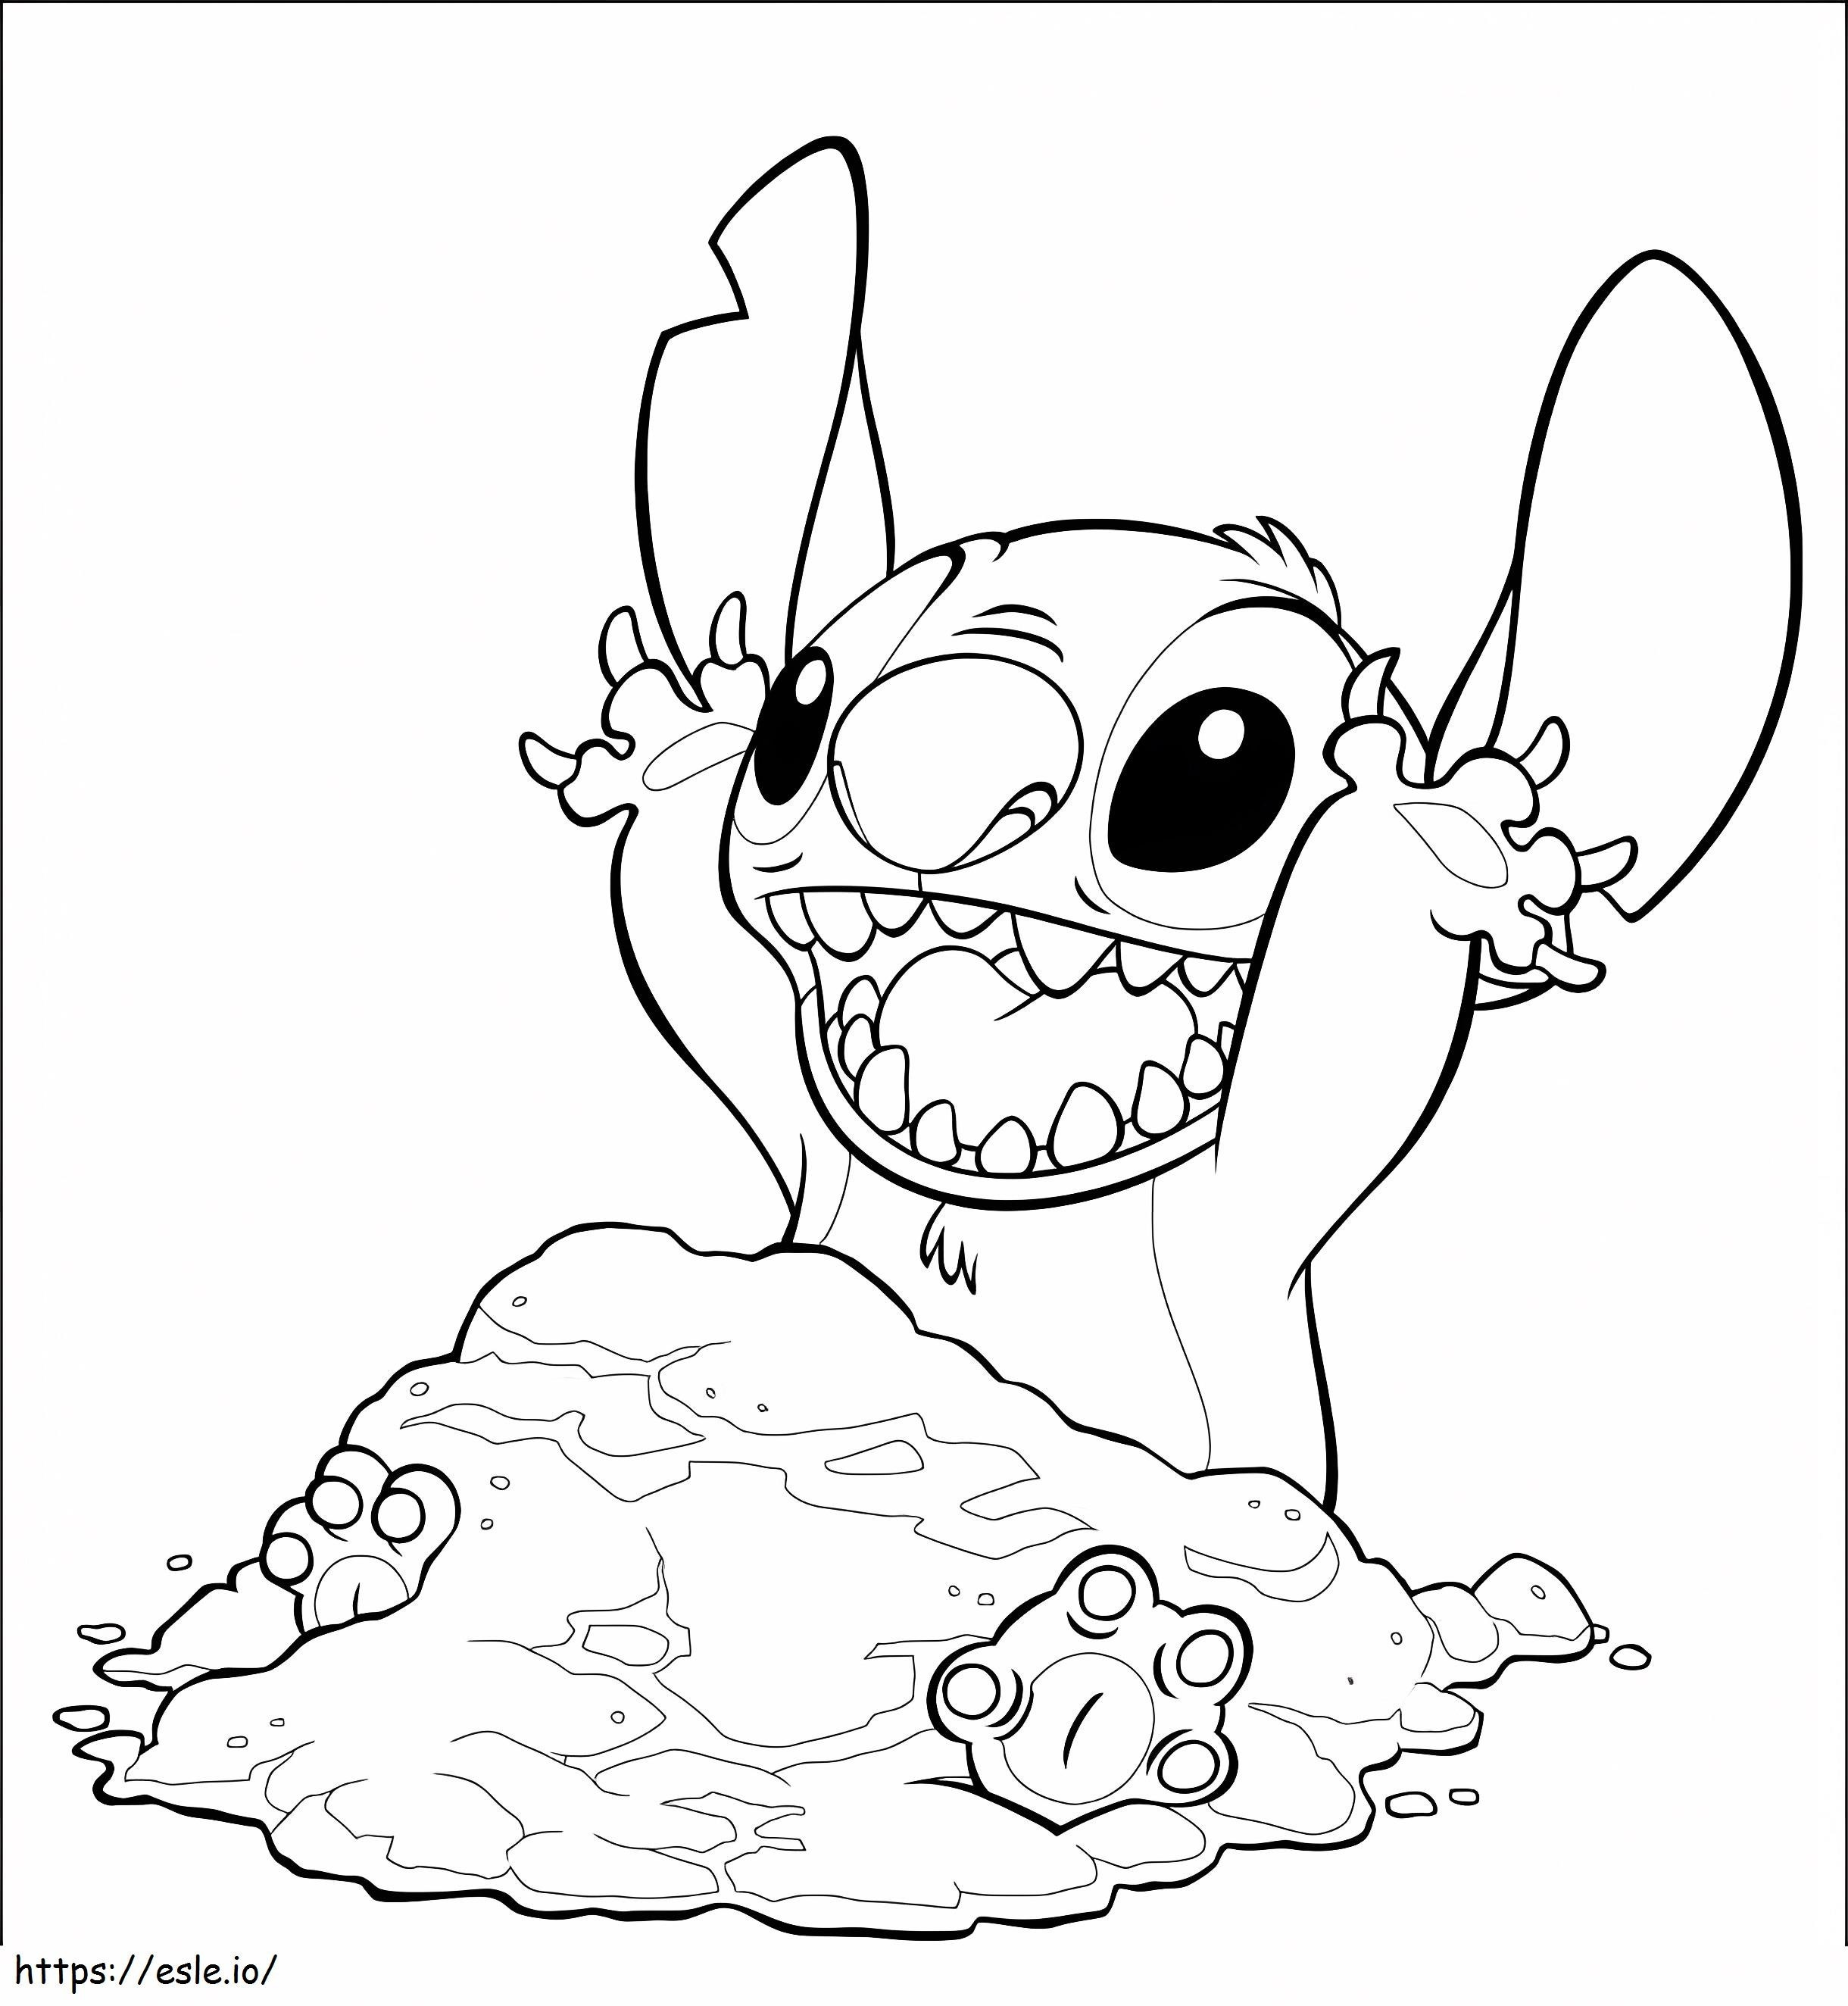 Funny Stitch 2 coloring page